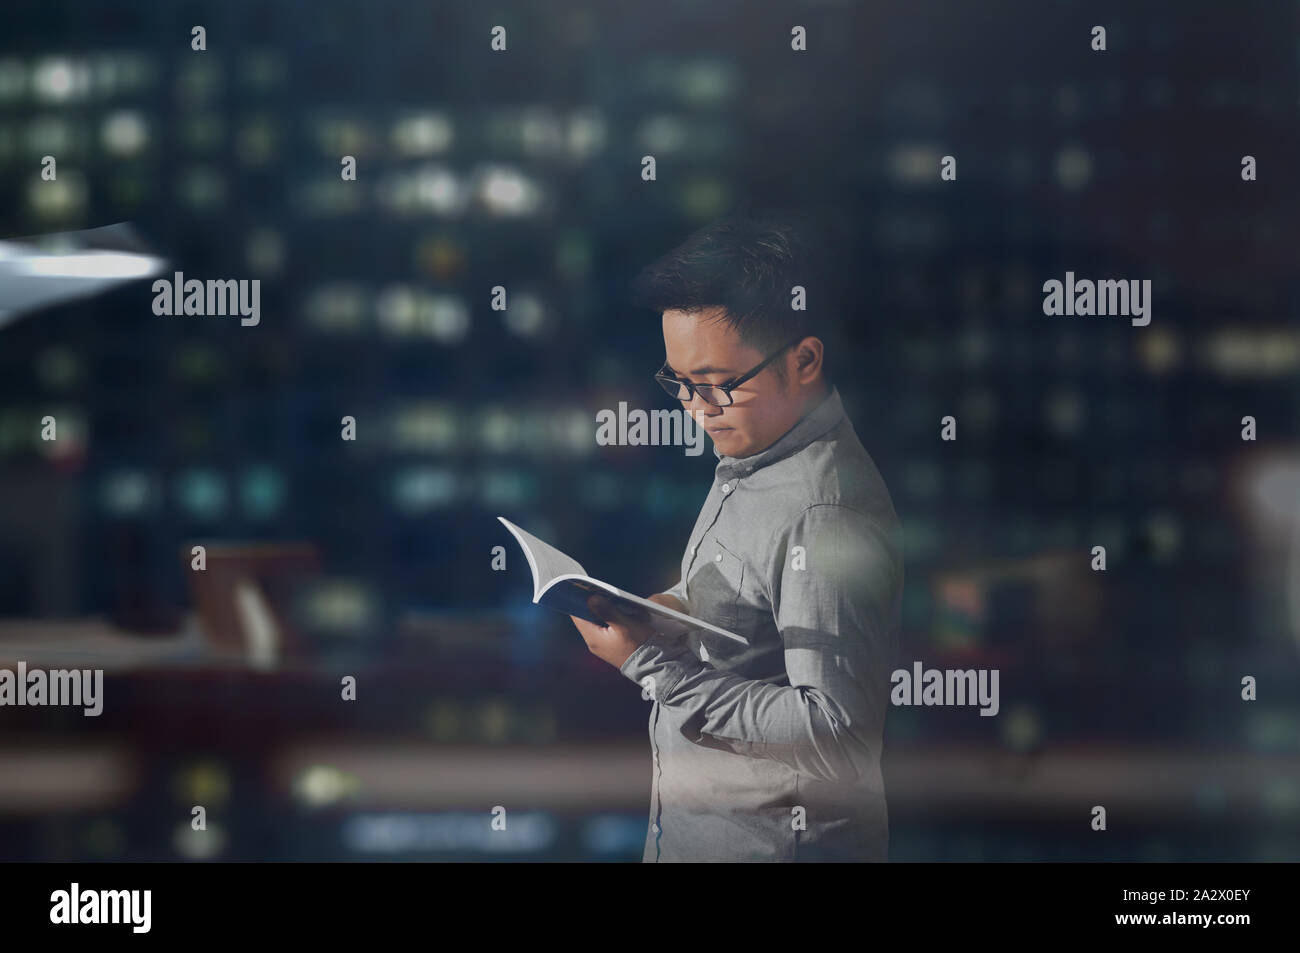 A side view shot of a young man in long sleeves and glasses peacefully reading a book inside a dark office room at night time. Stock Photo